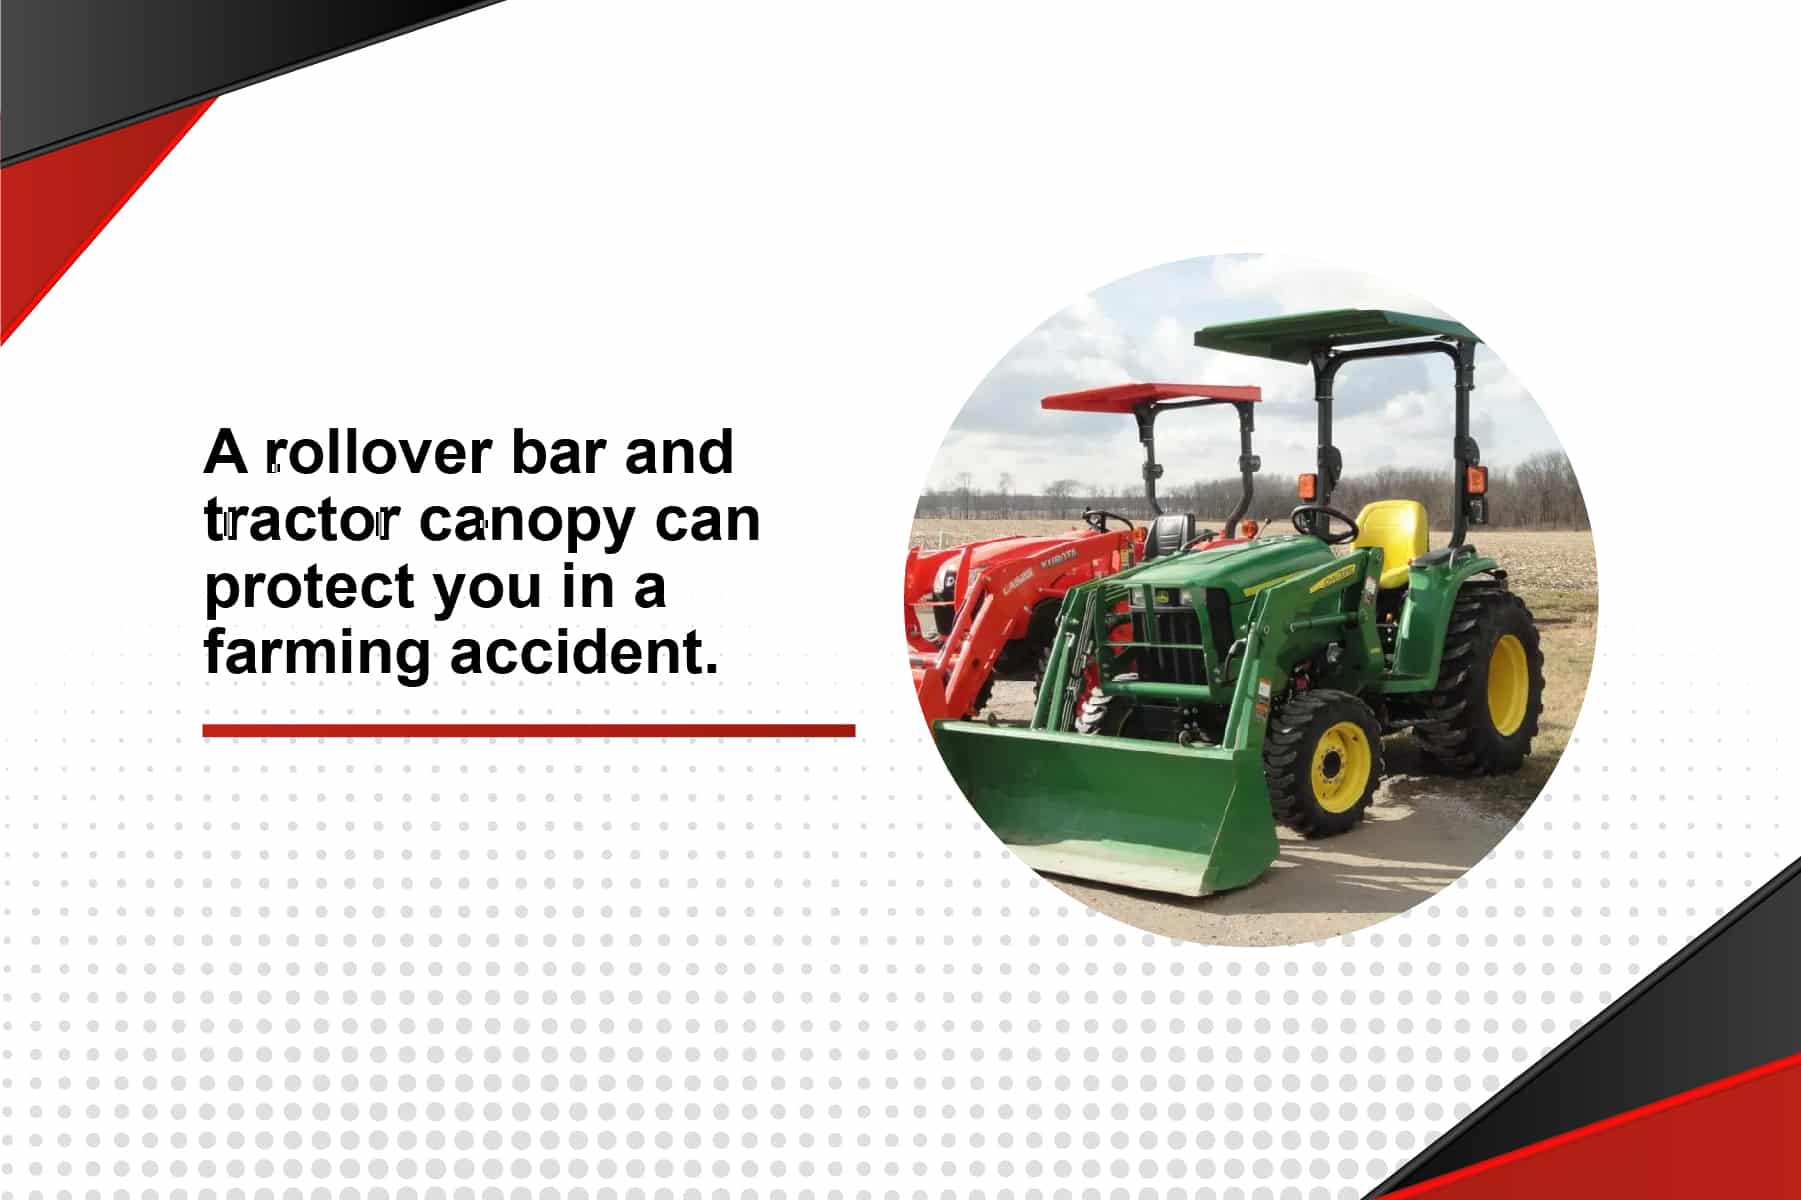 A rollover bar and tractor canopy can protect you in a farming accident